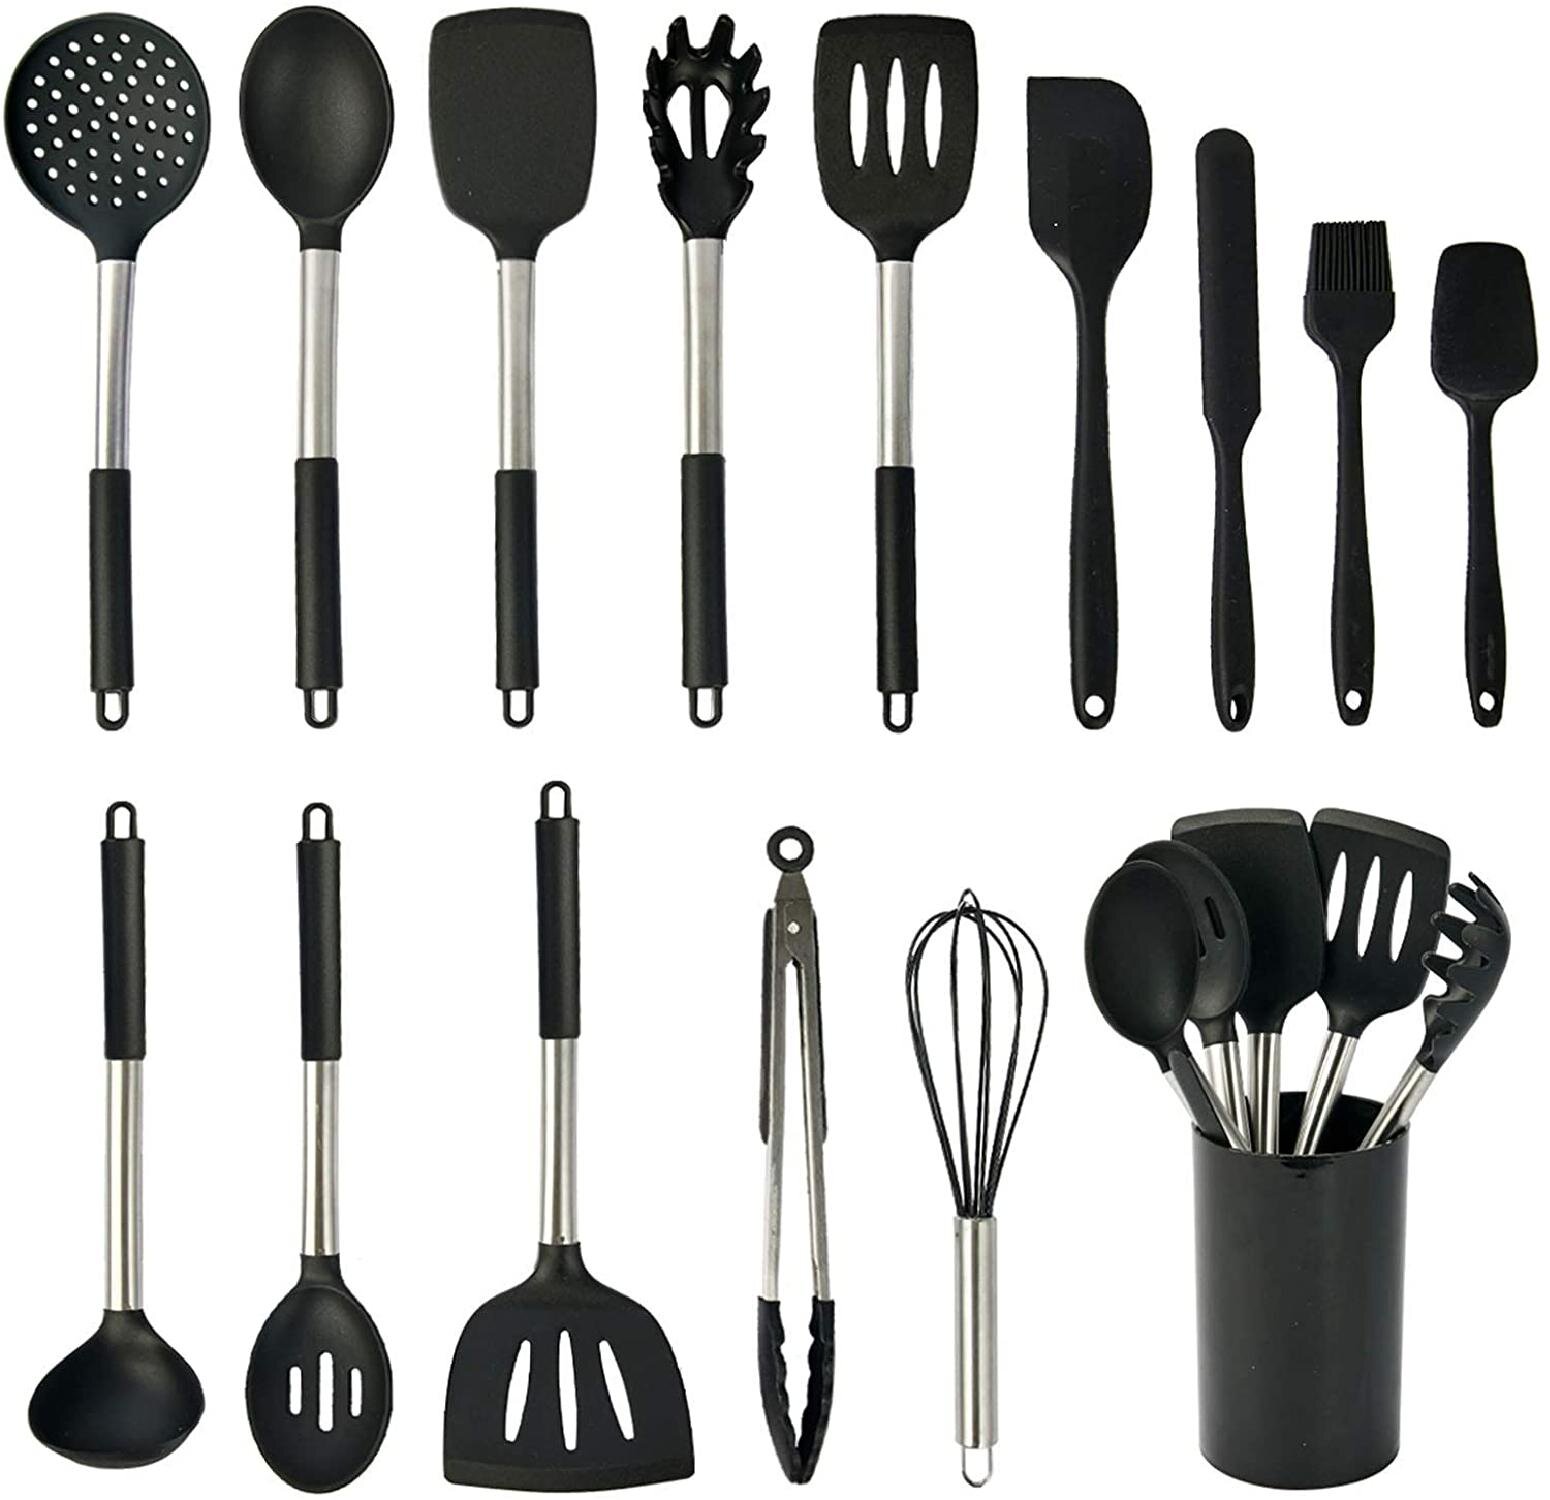 Cooking Utensils Set Stainless Steel & Silicone Tools Ladle Spoon Spatula Mixing